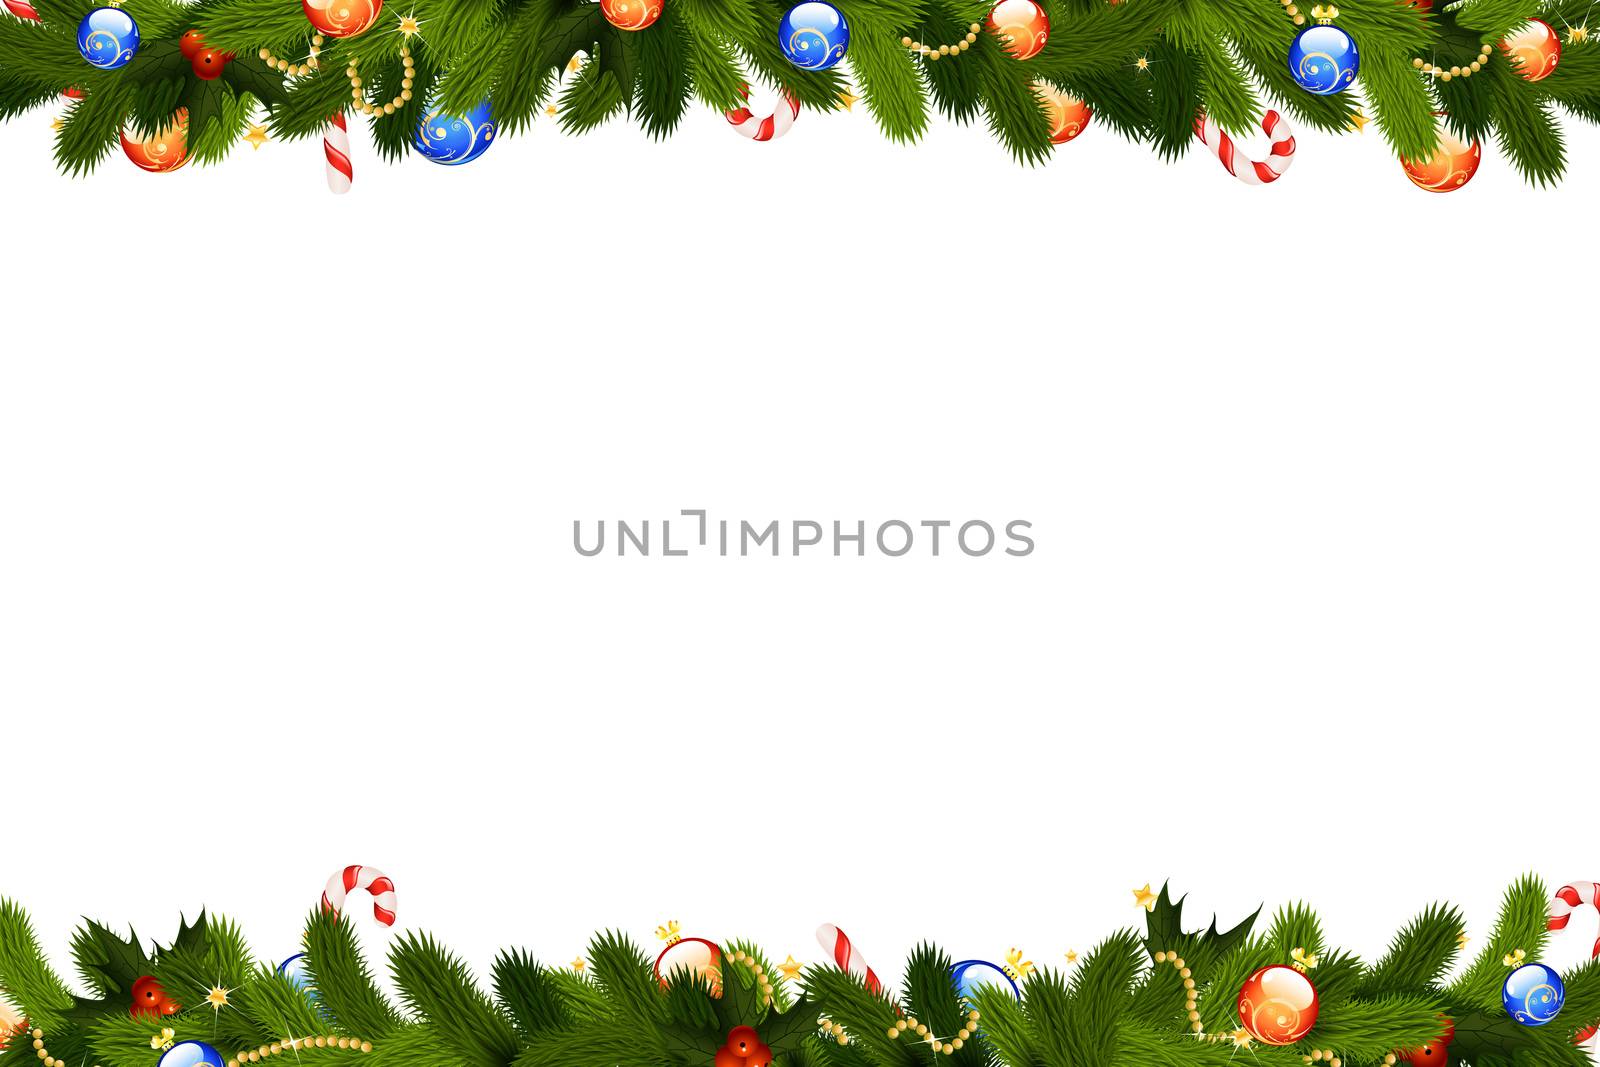 Christmas frame with fir-tree decoration and mistletoe isolated on white backgrond